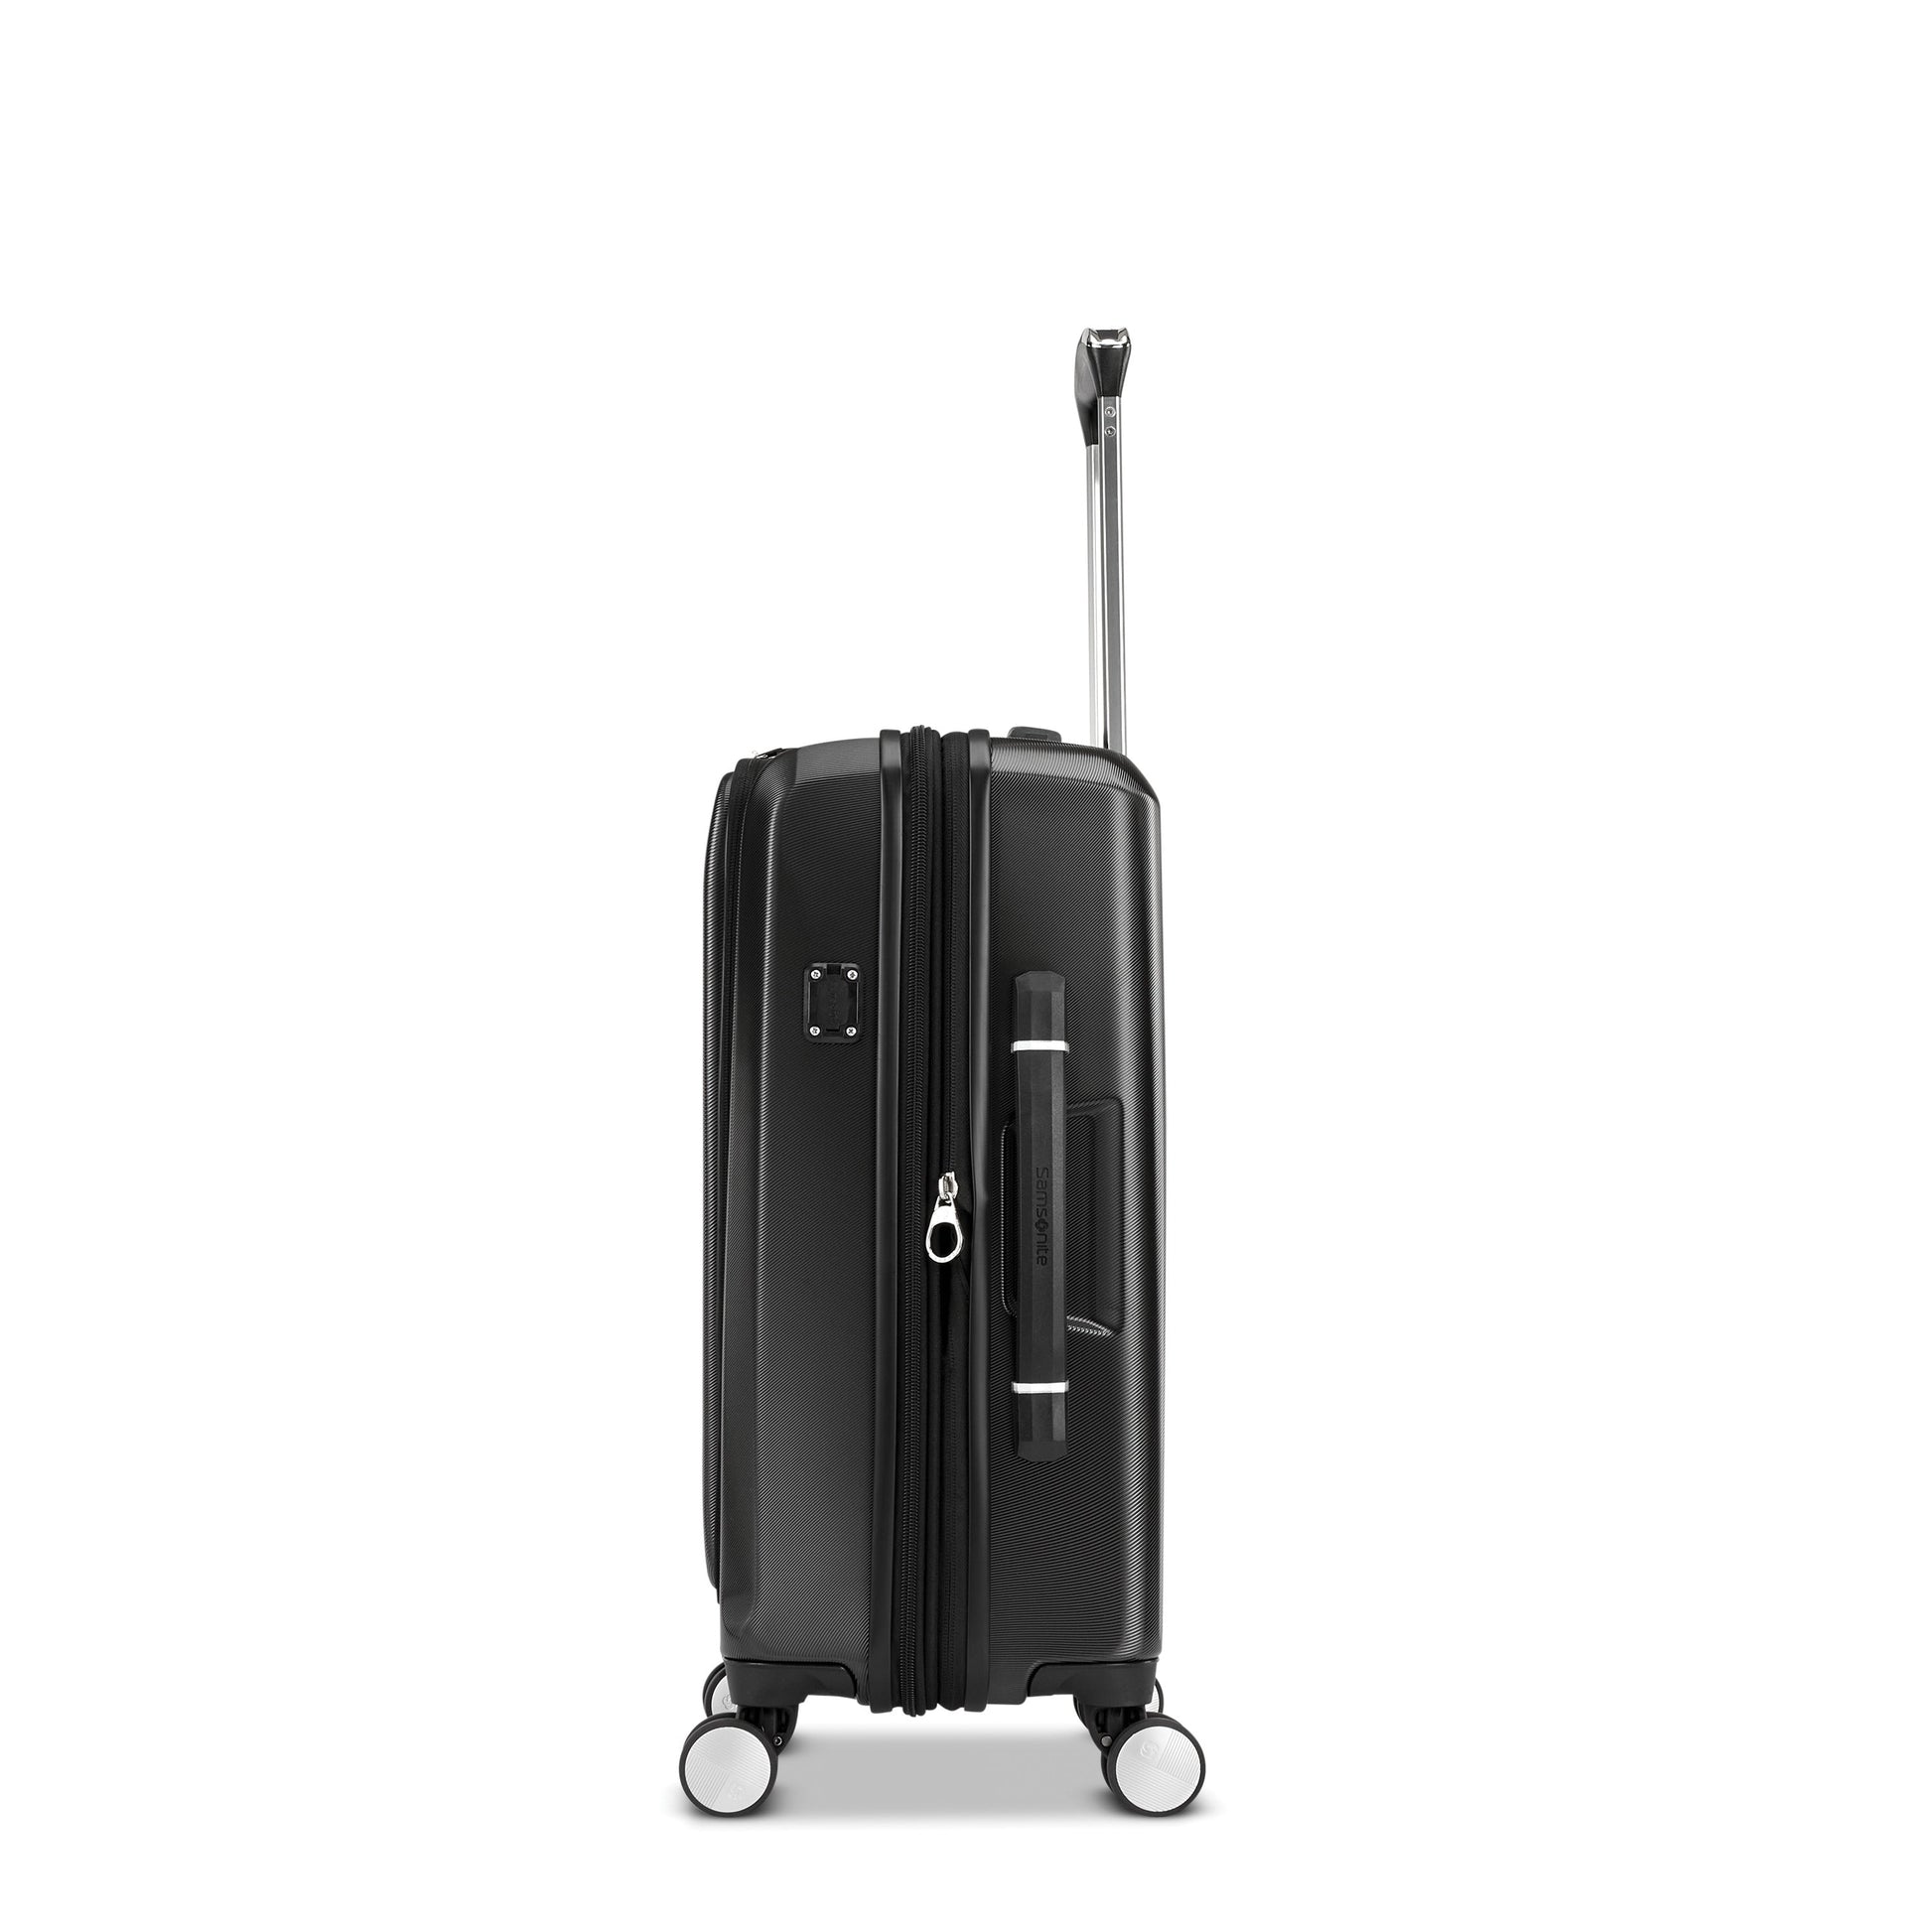 Samsonite Just Right Spinner Carry-On Expandable Luggage with 15" Laptop Compartment